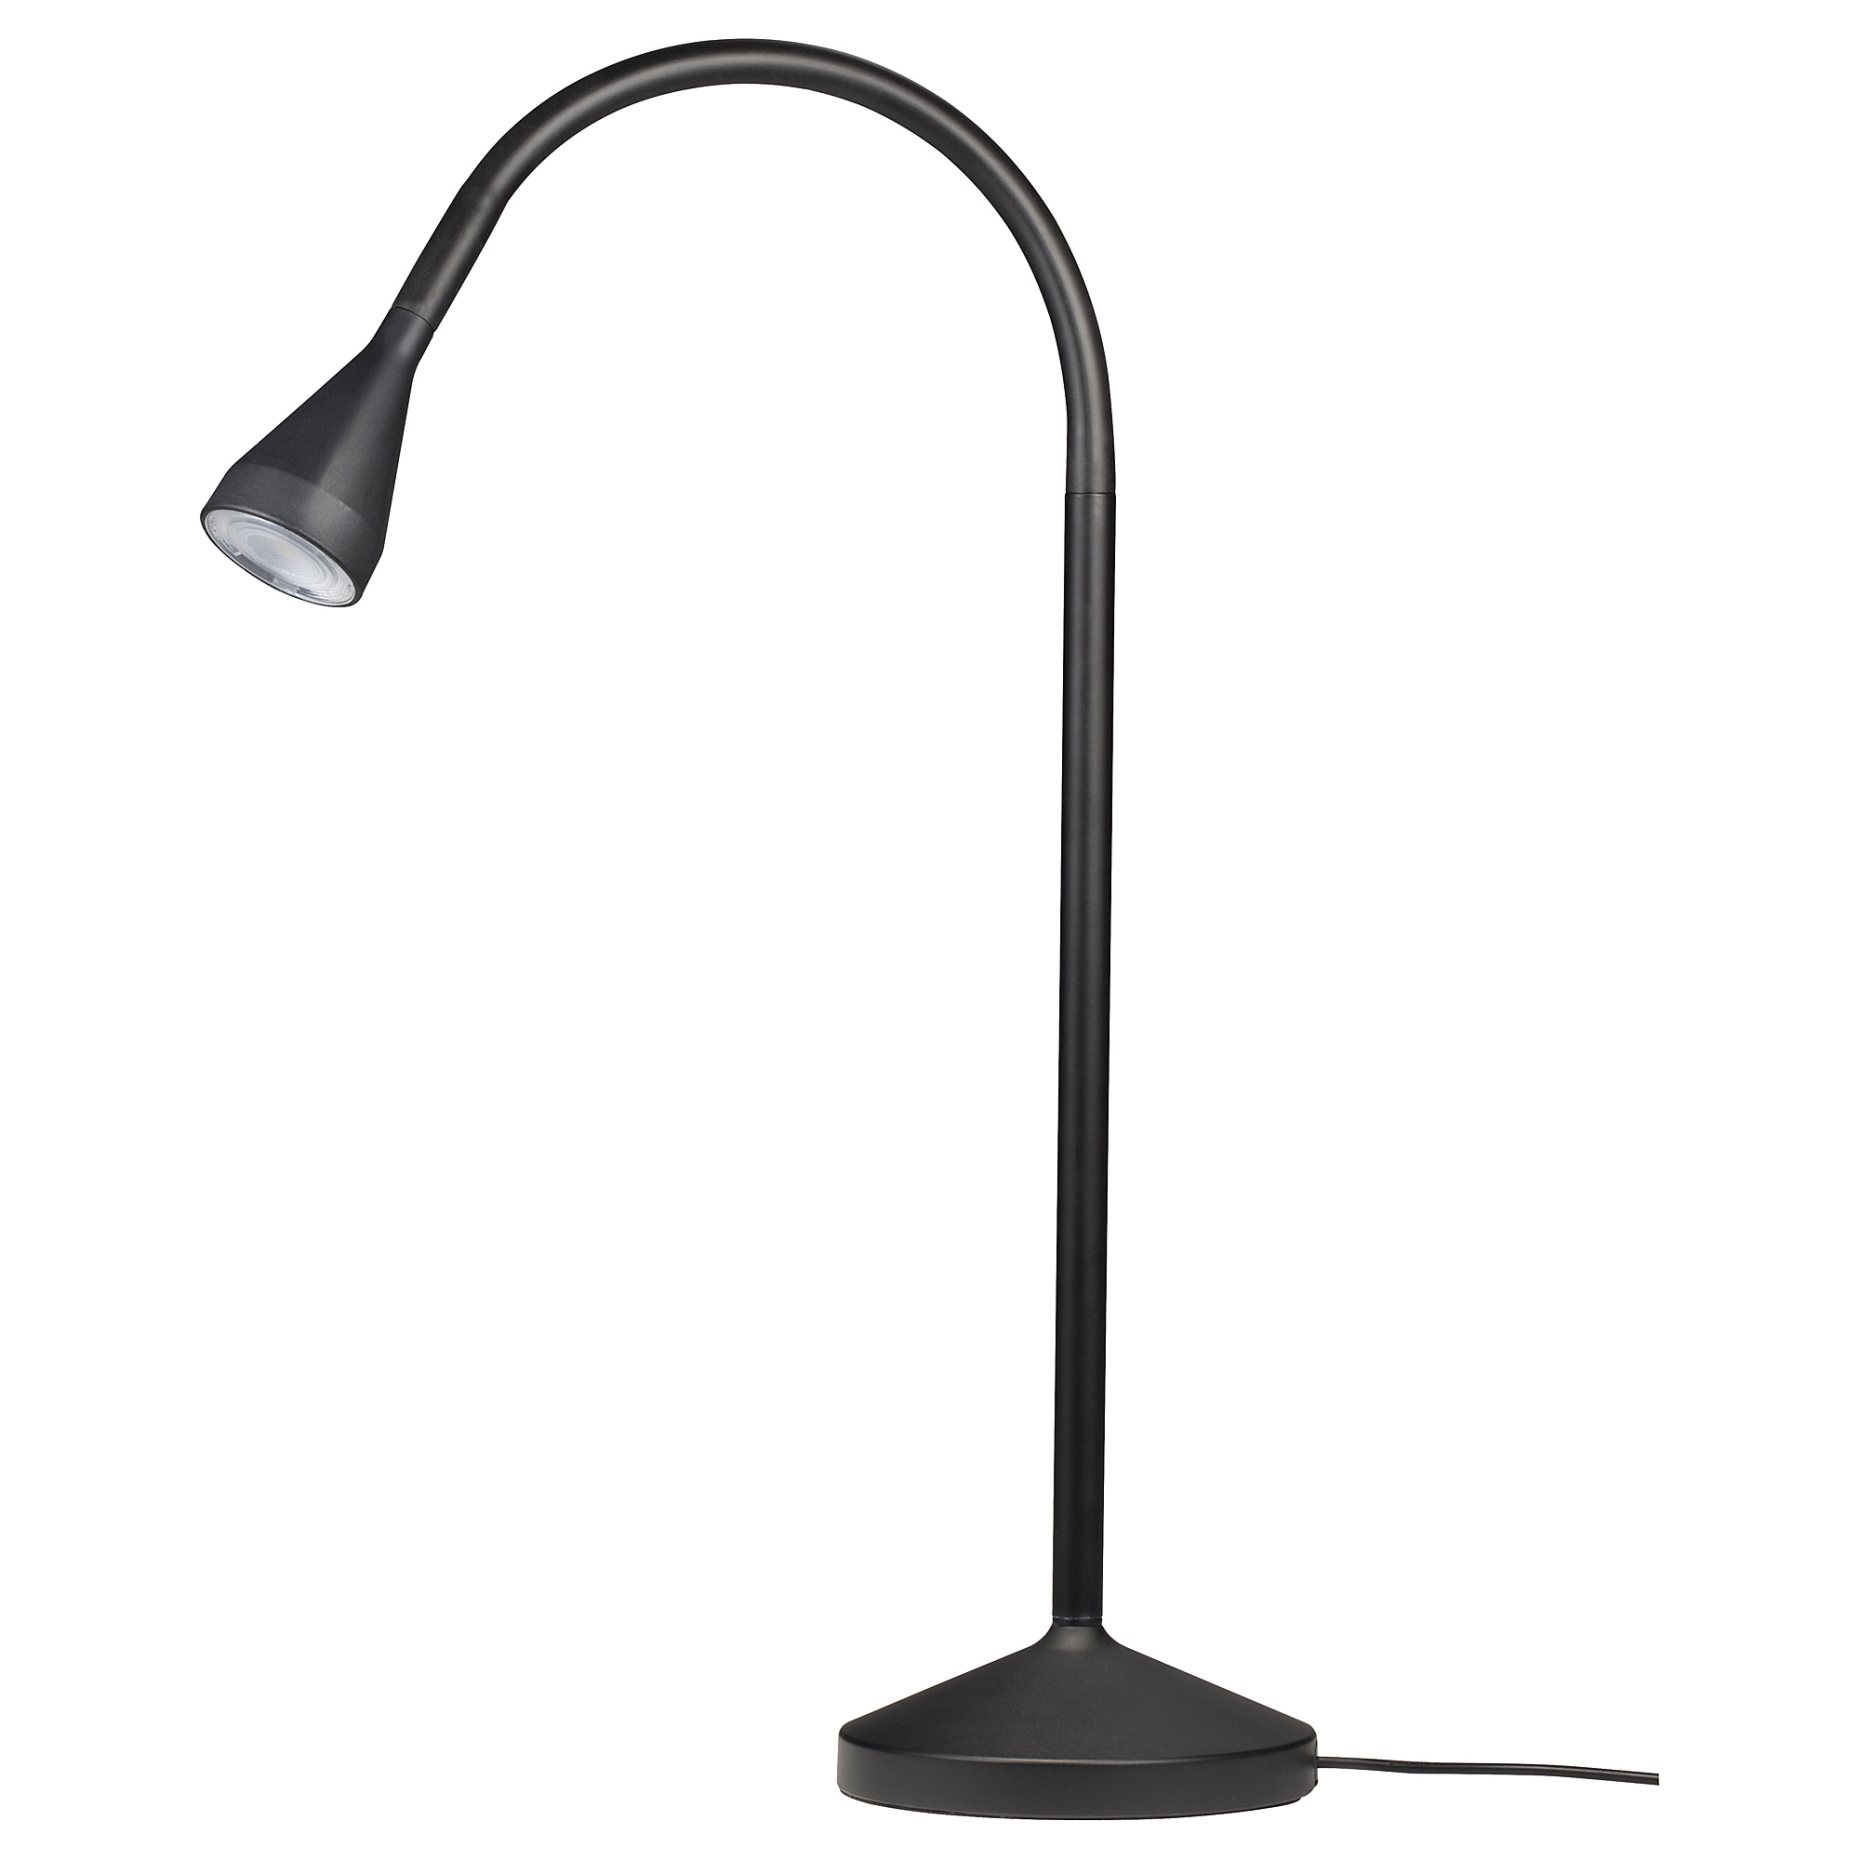 NÄVLINGE, work lamp with built-in LED light source, 404.049.09